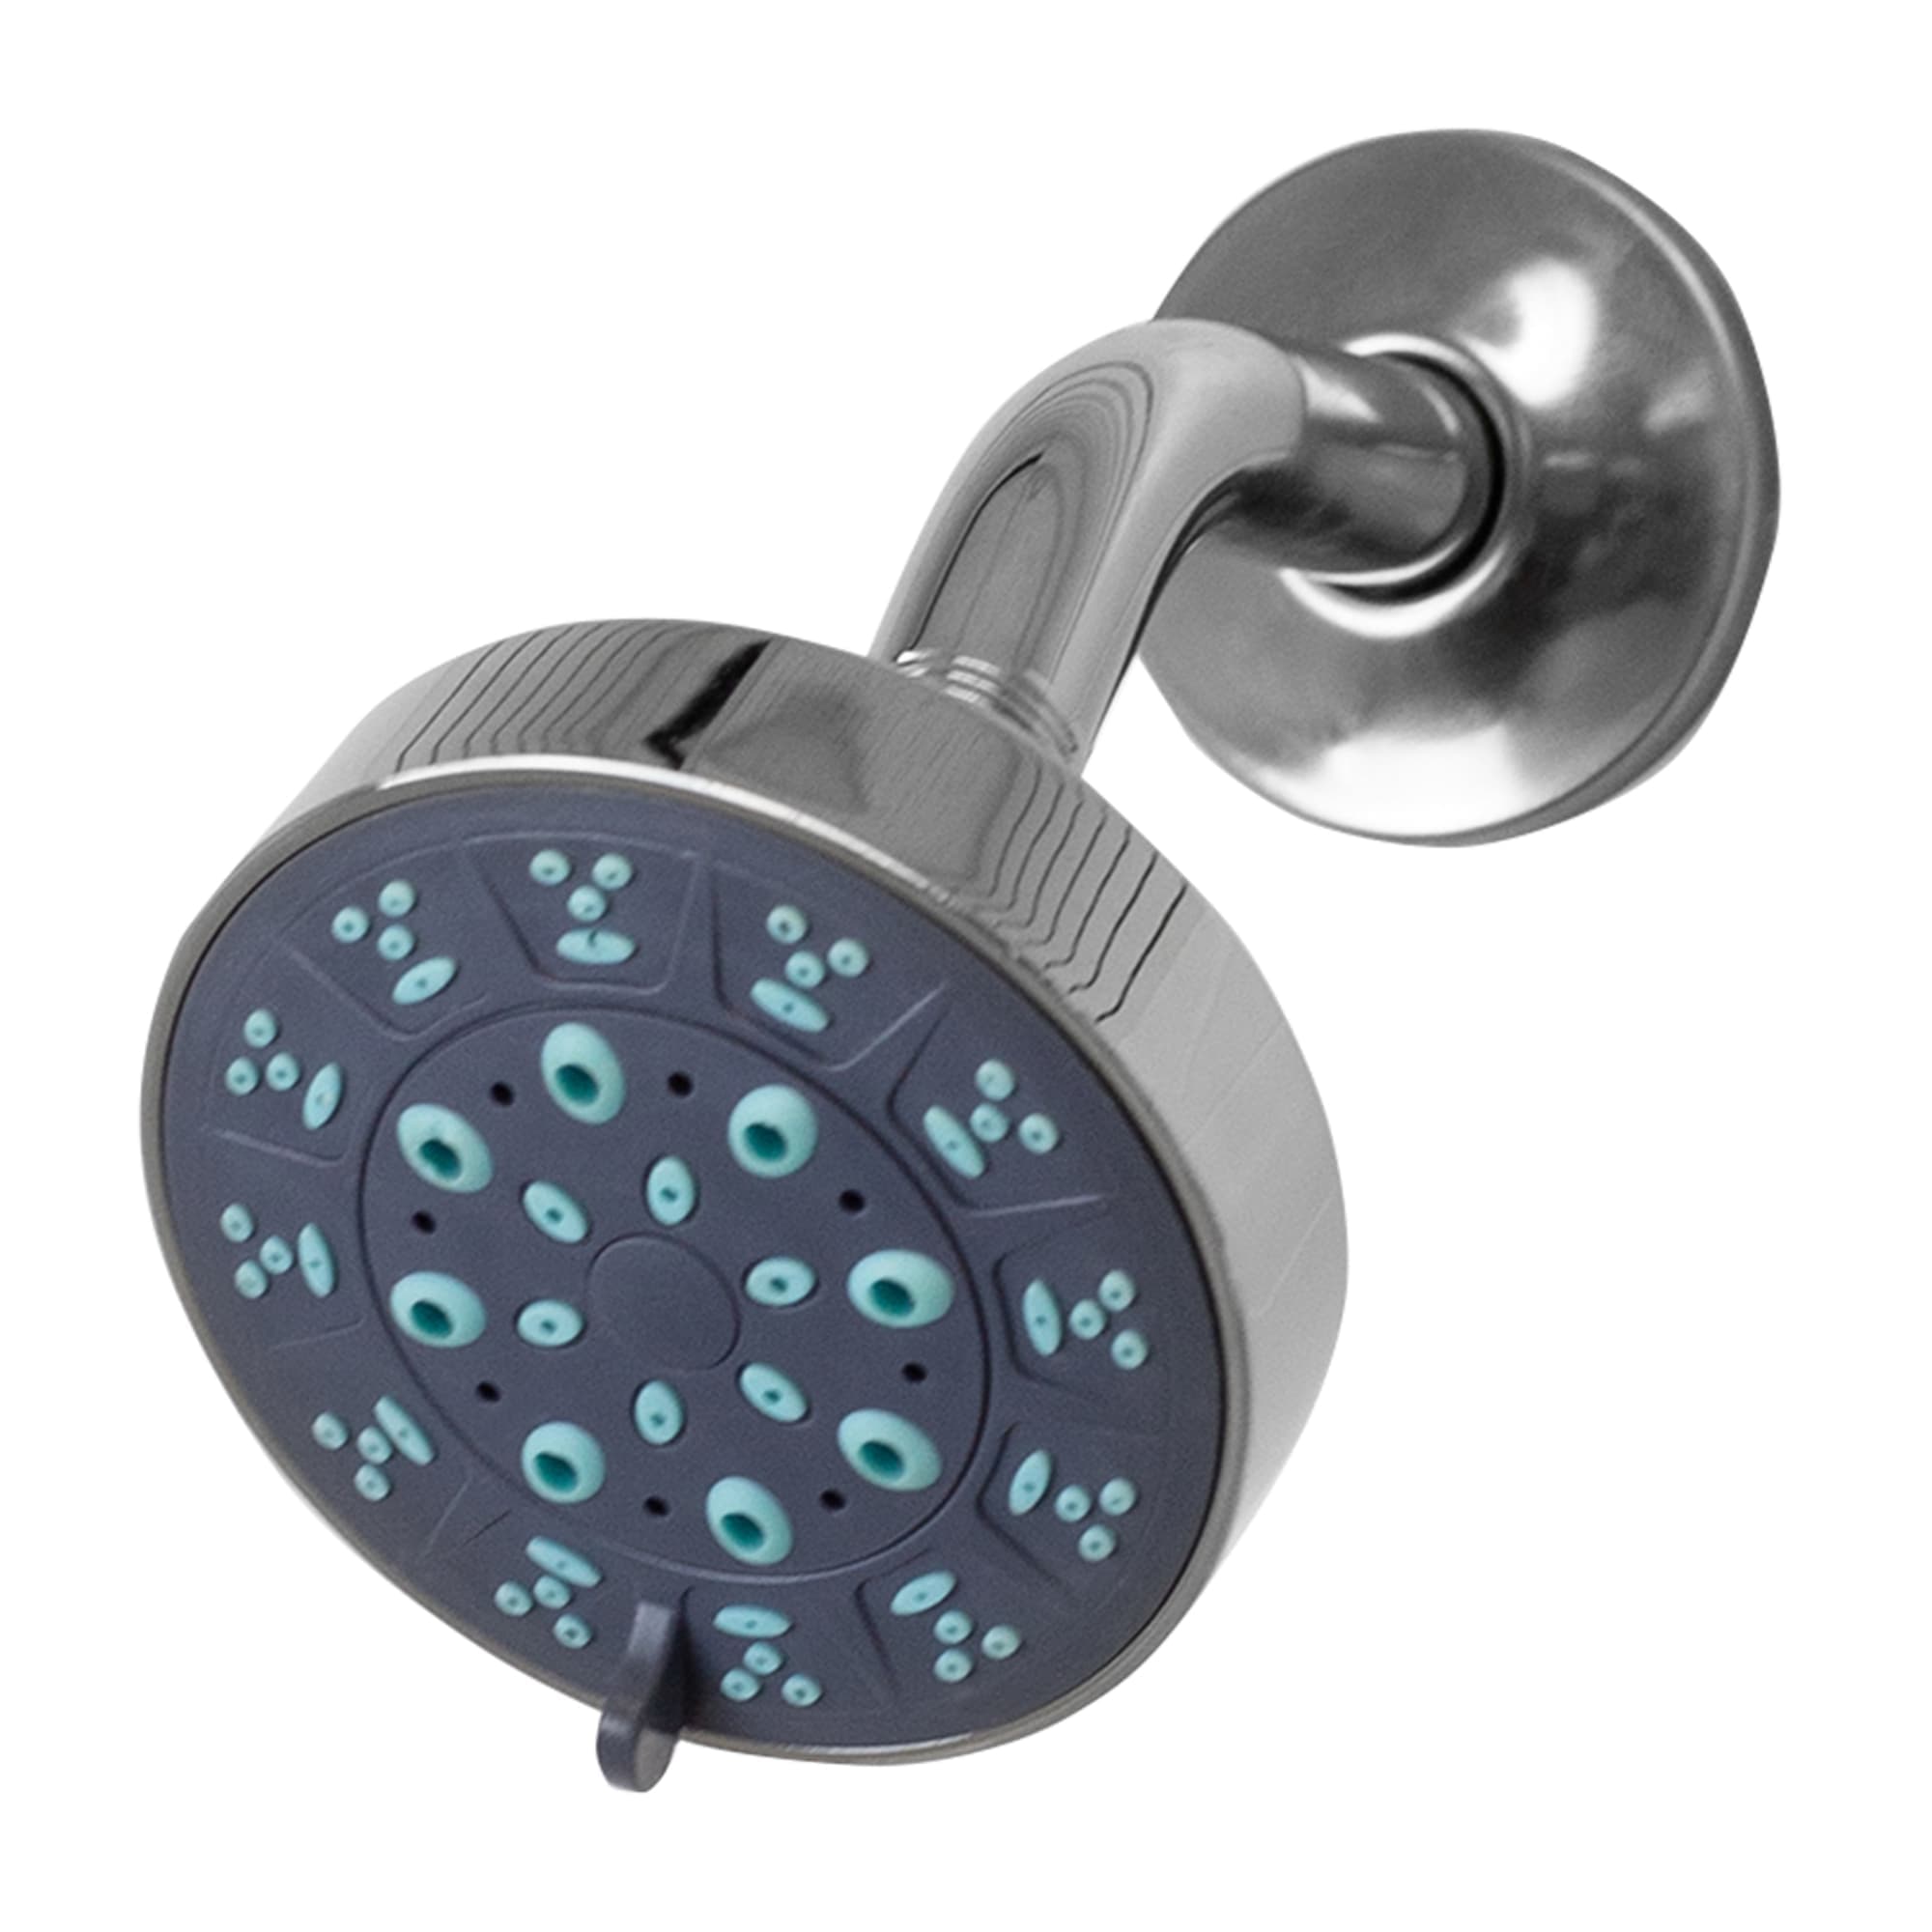 Home Basics Pure Paradise 3.75 in. Fixed Shower Head 5 Function Shower Massager, Chrome $5.00 EACH, CASE PACK OF 12